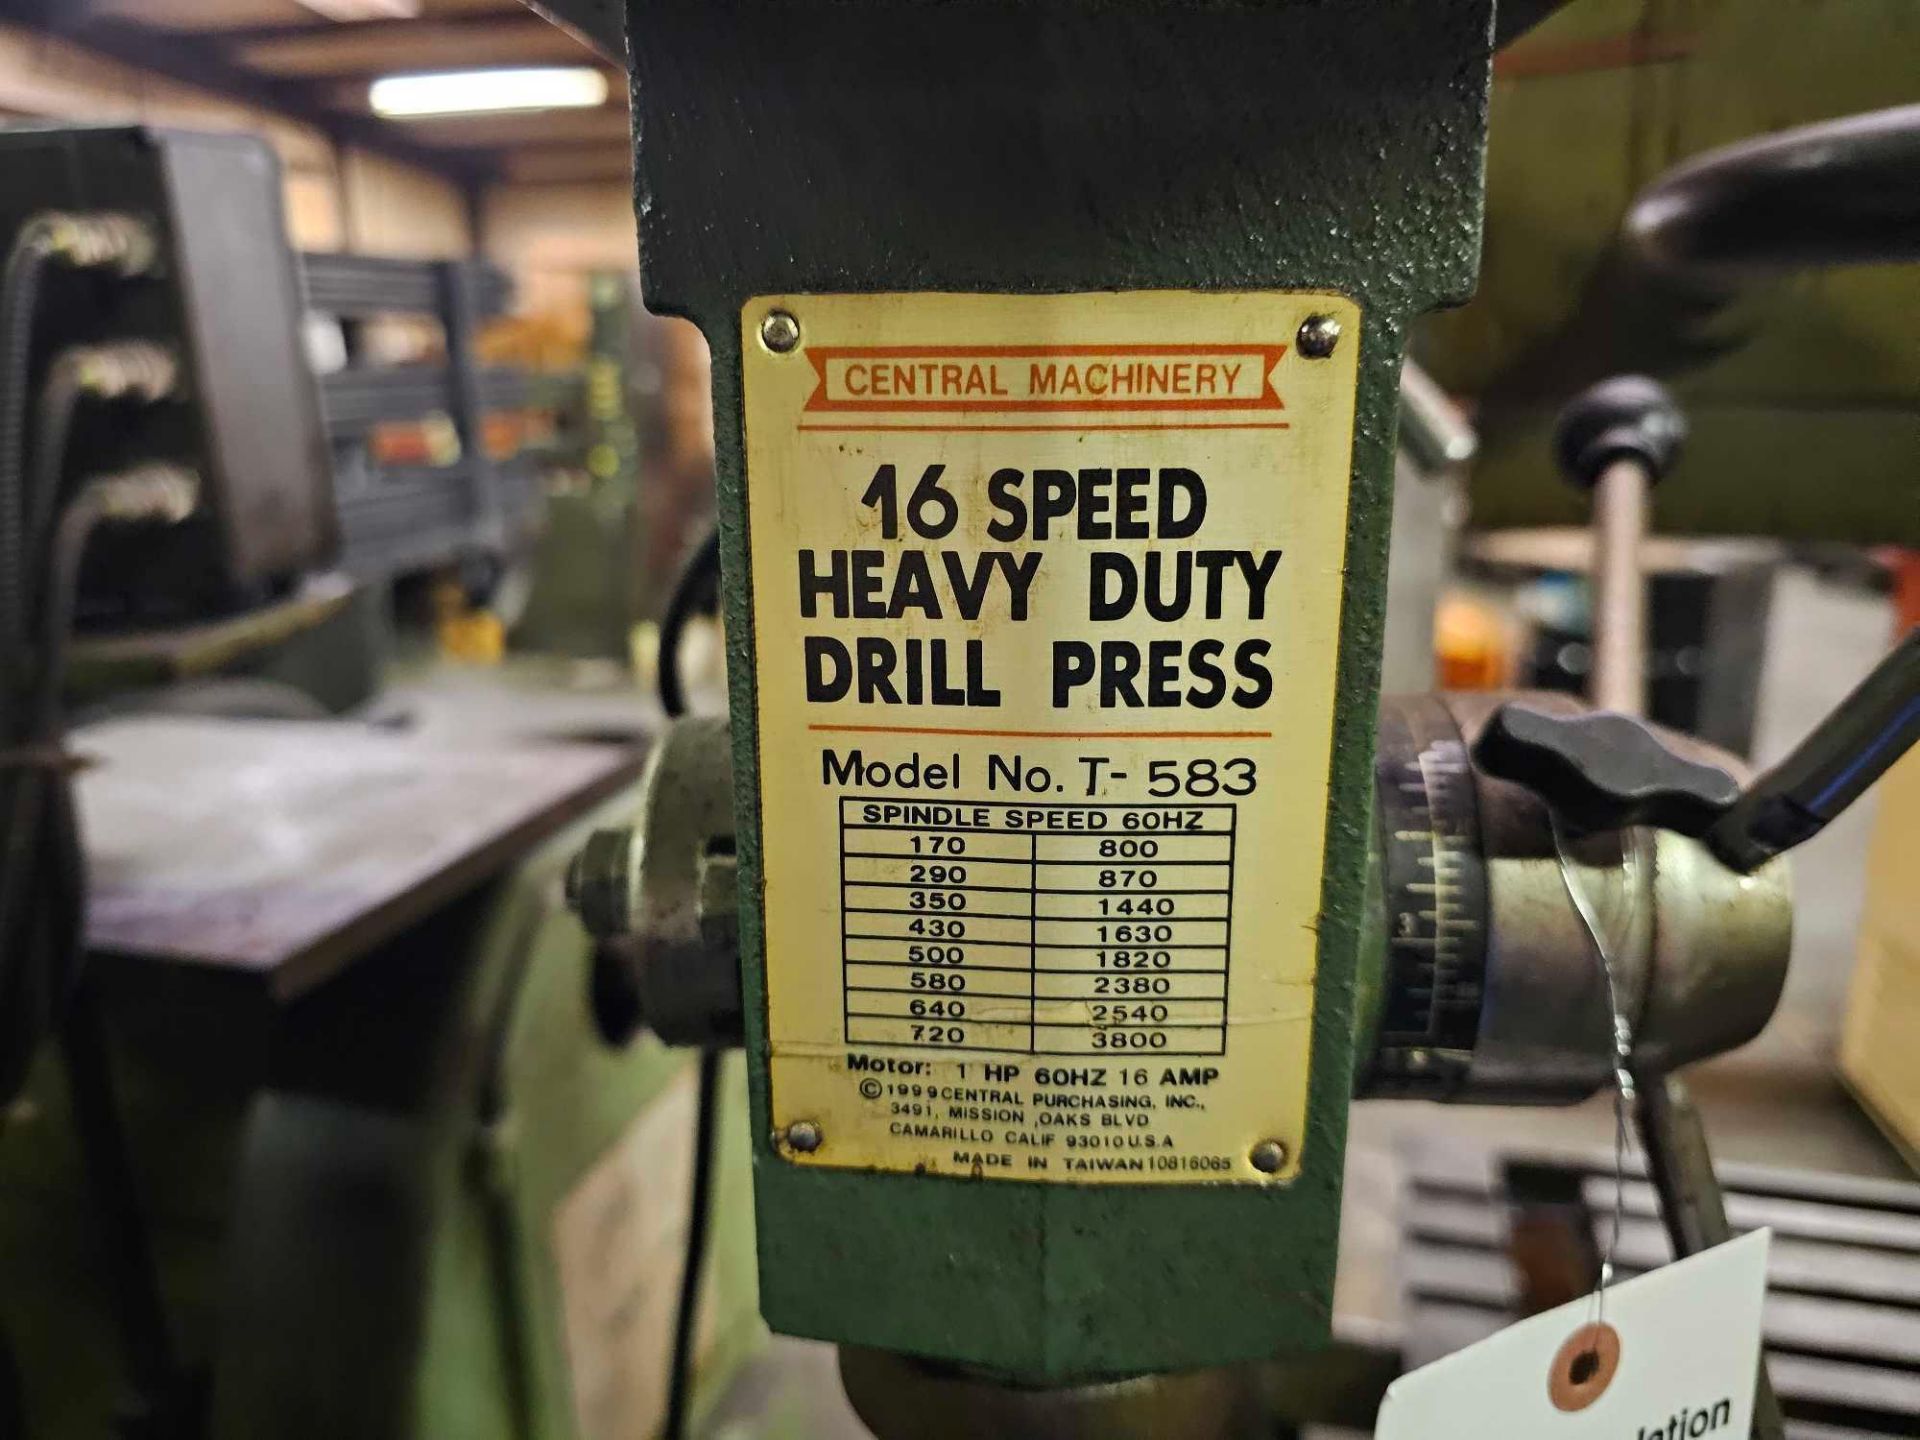 CENTRAL MACHINERY 16 SPEED HEAVY DUTY DRILL PRESS - Image 7 of 7